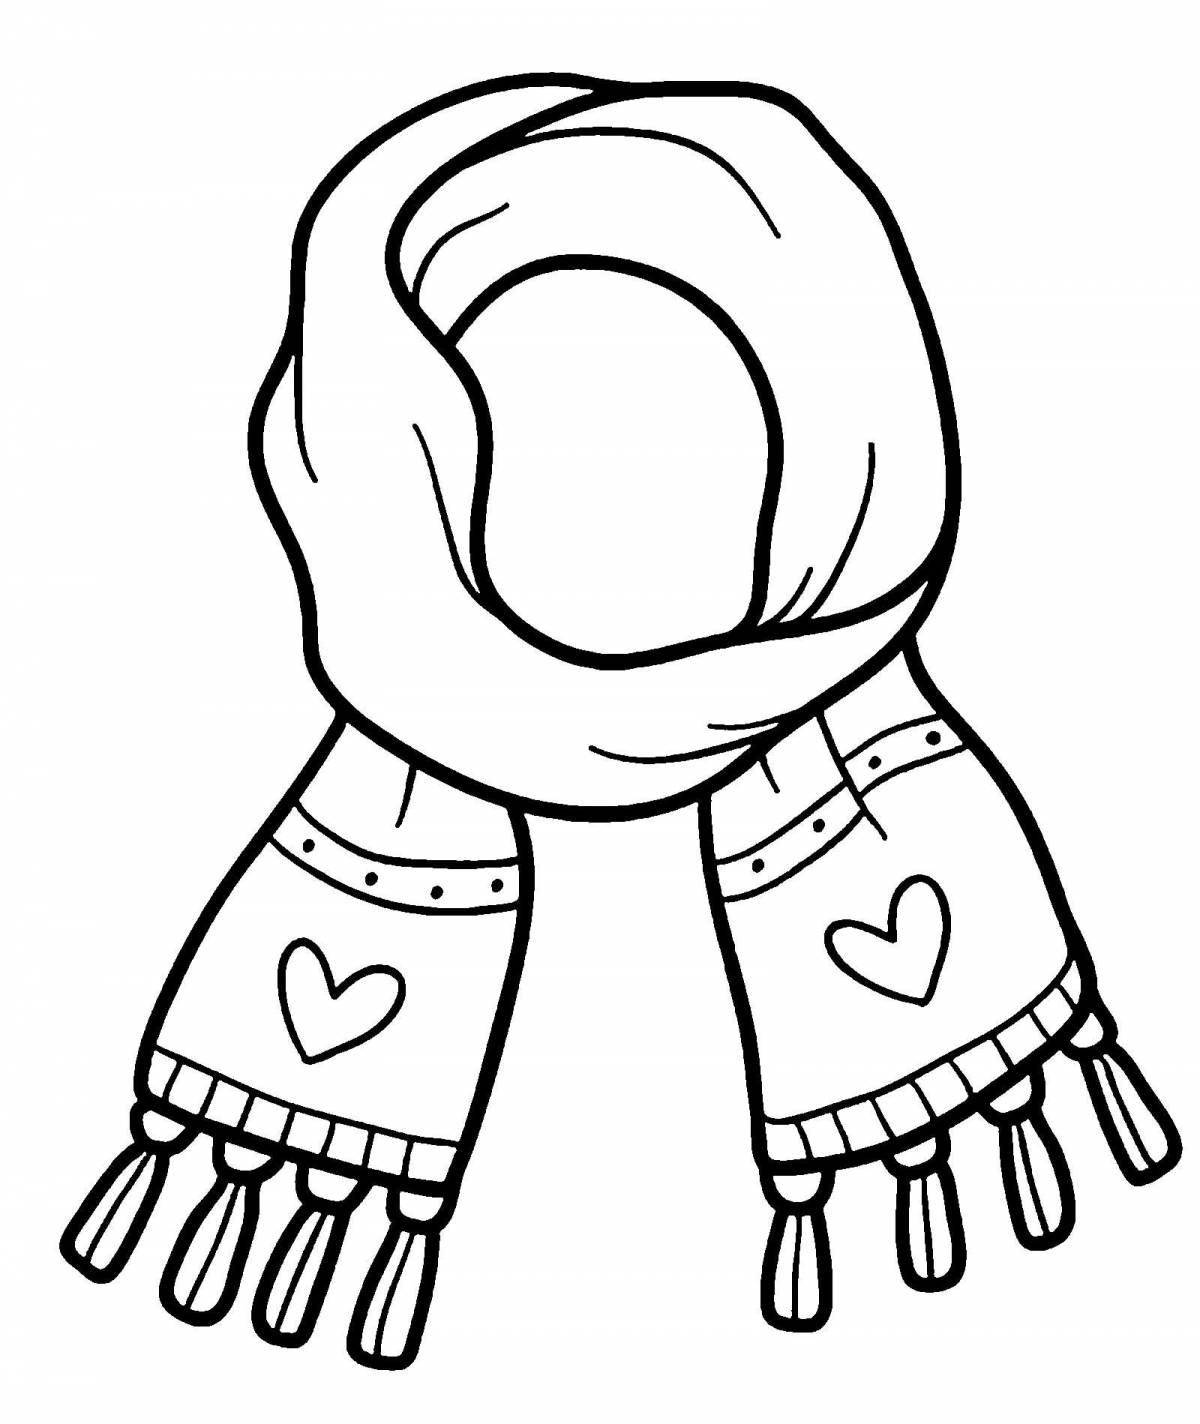 Coloring page dazzling scarf